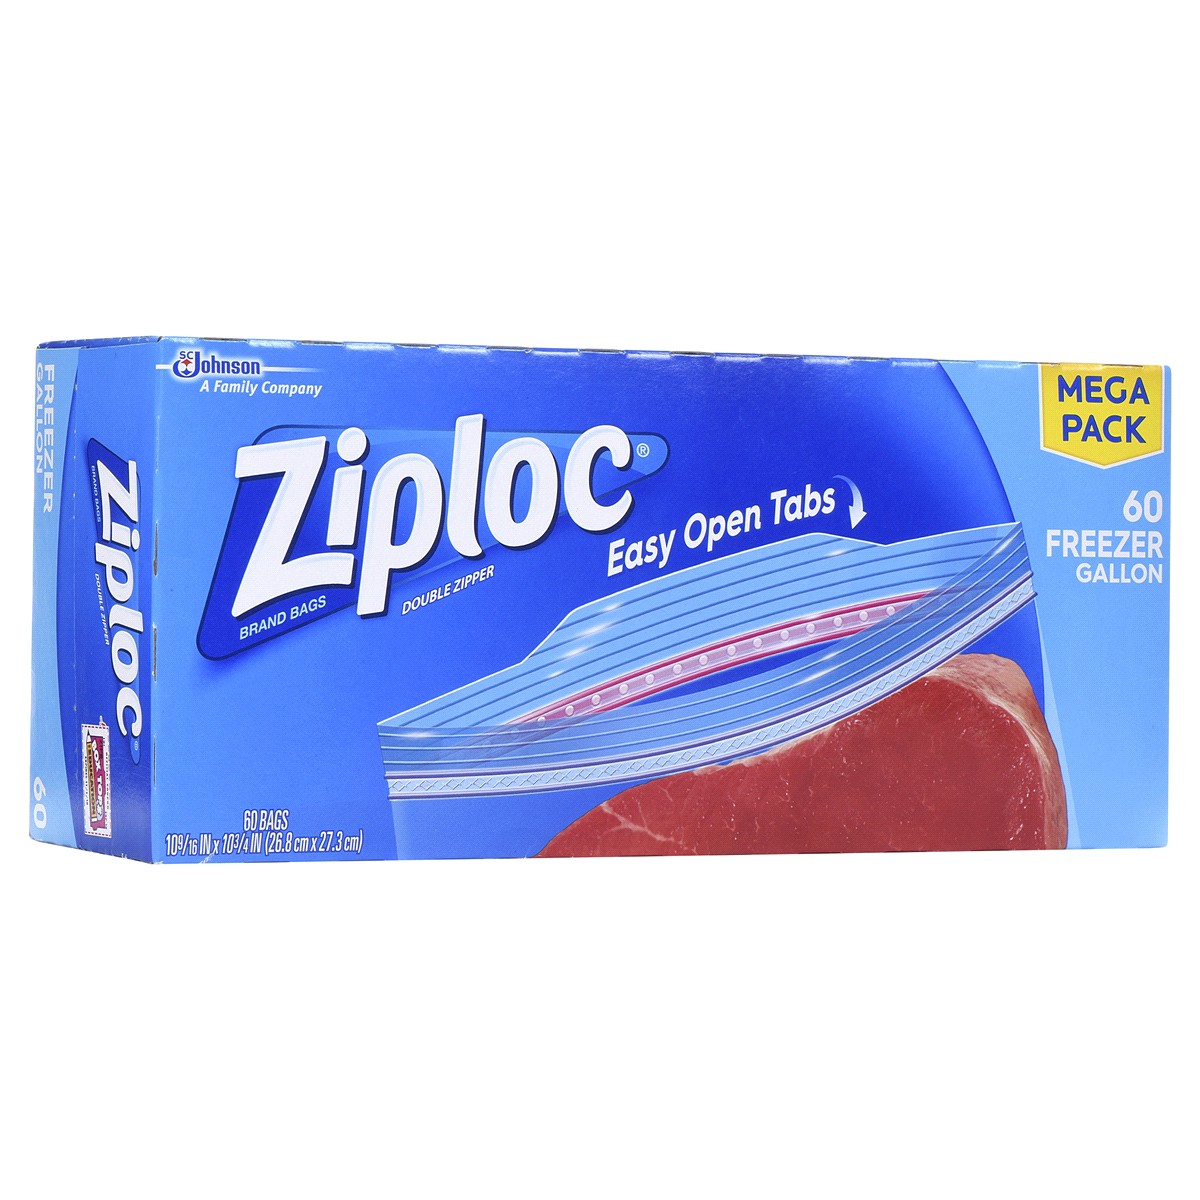 slide 8 of 10, Ziploc Brand Freezer Bags with New Stay Open Design, Gallon, 60, Patented Stand-up Bottom, Easy to Fill Freezer Bag, Unloc a Free Set of Hands in the Kitchen, Microwave Safe, BPA Free, 60 ct